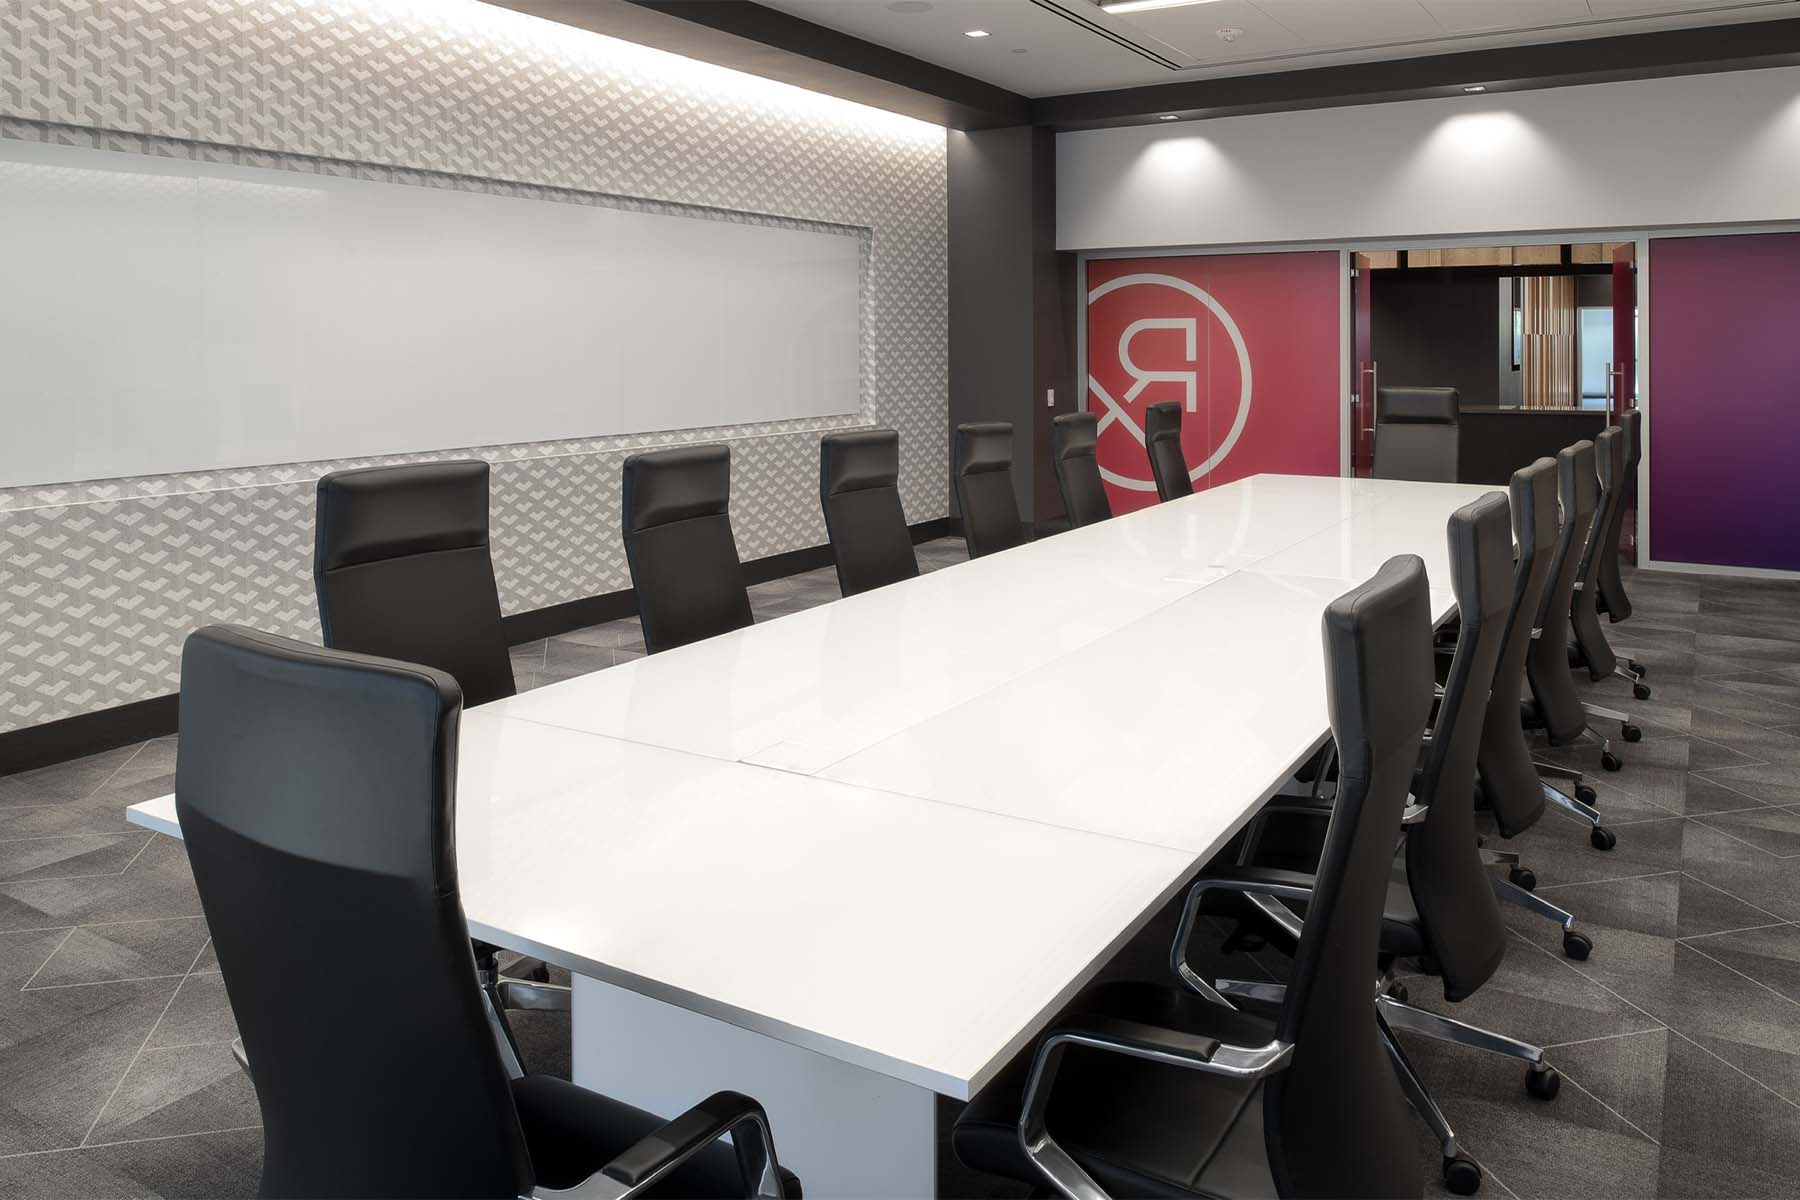 Connective RX conference room with futuristic aesthetic